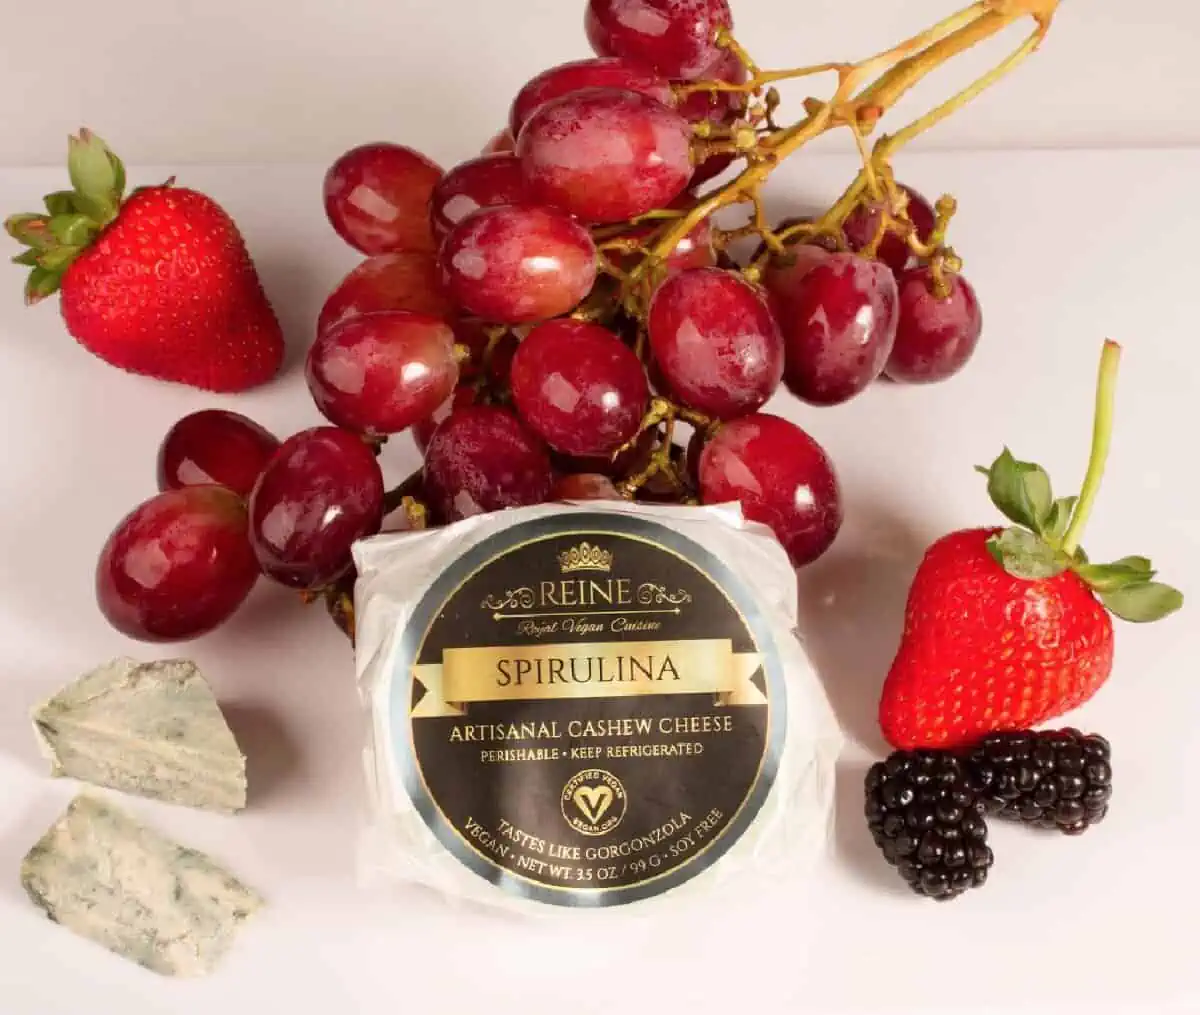 A light colored table holding a white wax paper round of Reine Vegan Spirulina Blue Cheese with a black and gold label surrounded by red grapes, strawberries, and blackberries.